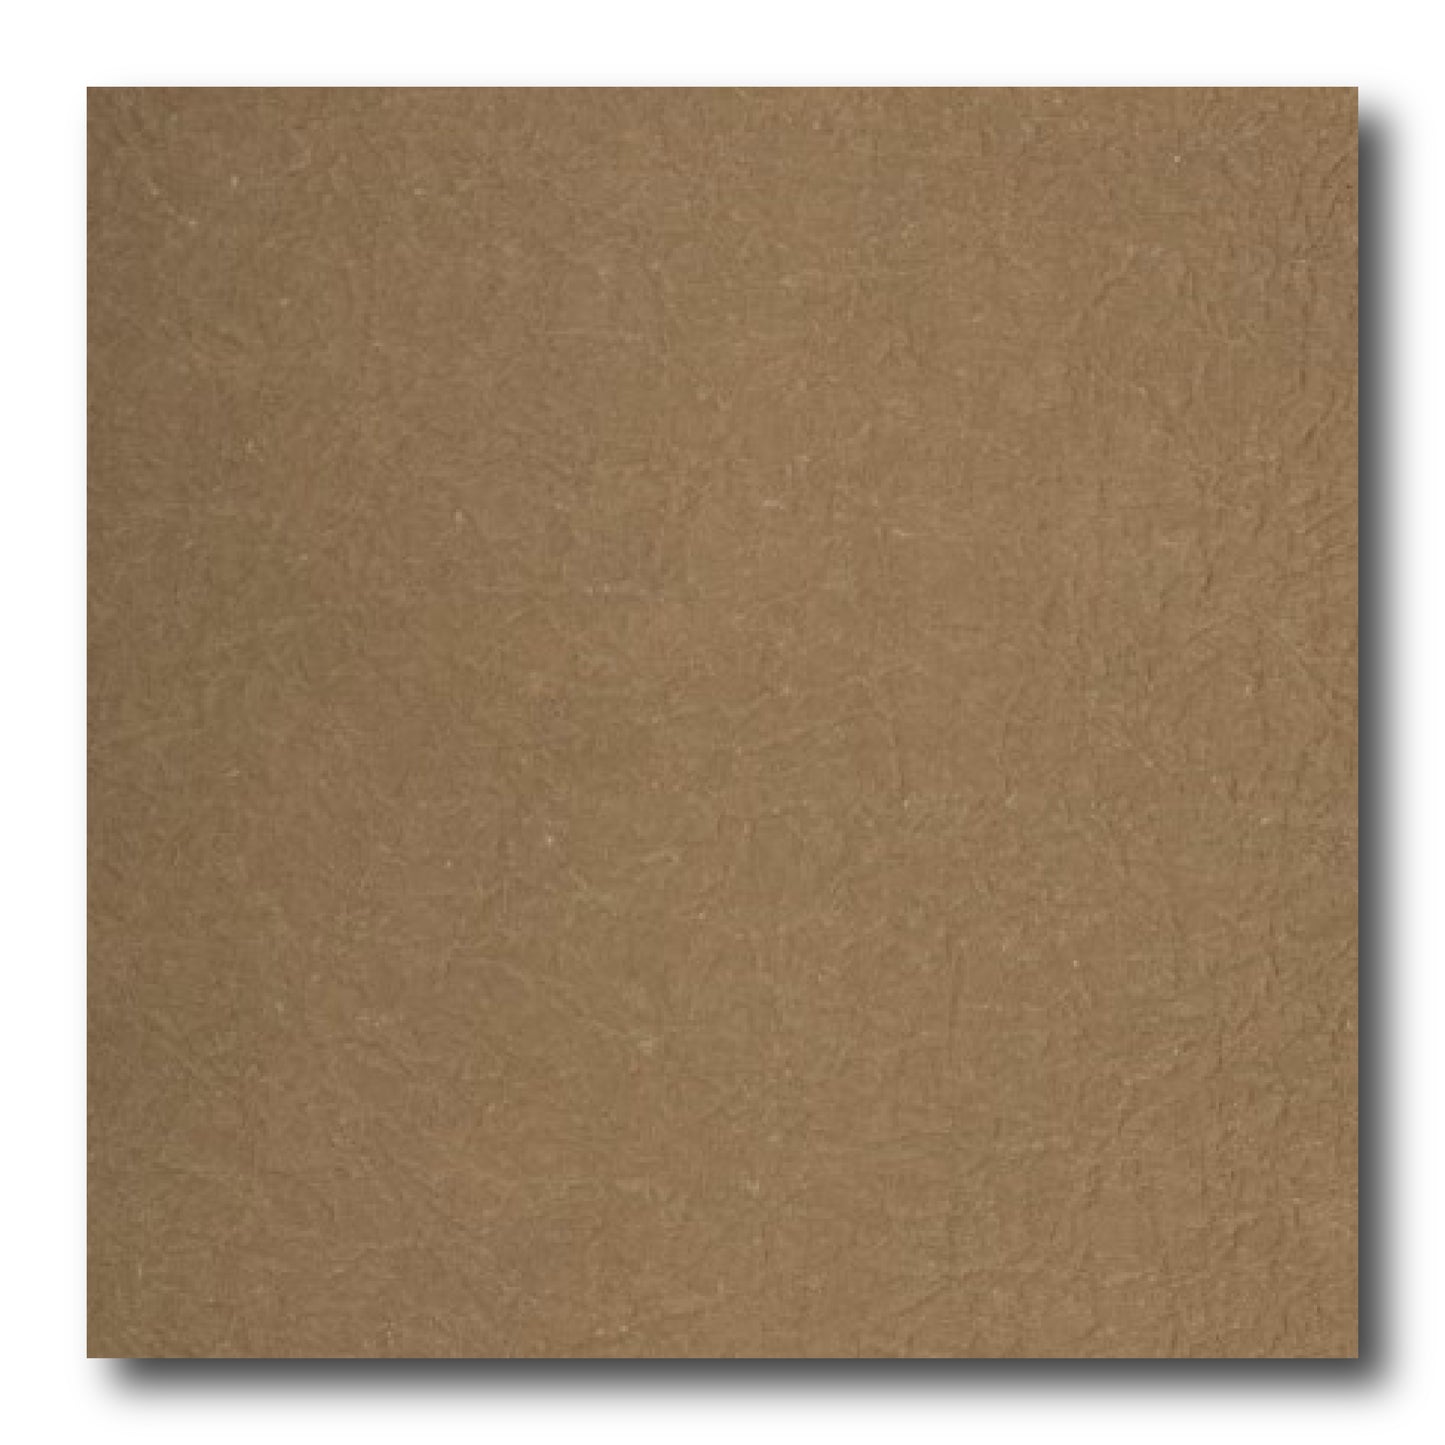 Echizen Momigami (Dual Color: Light Brown/White)(Sold per sheet) 35cm